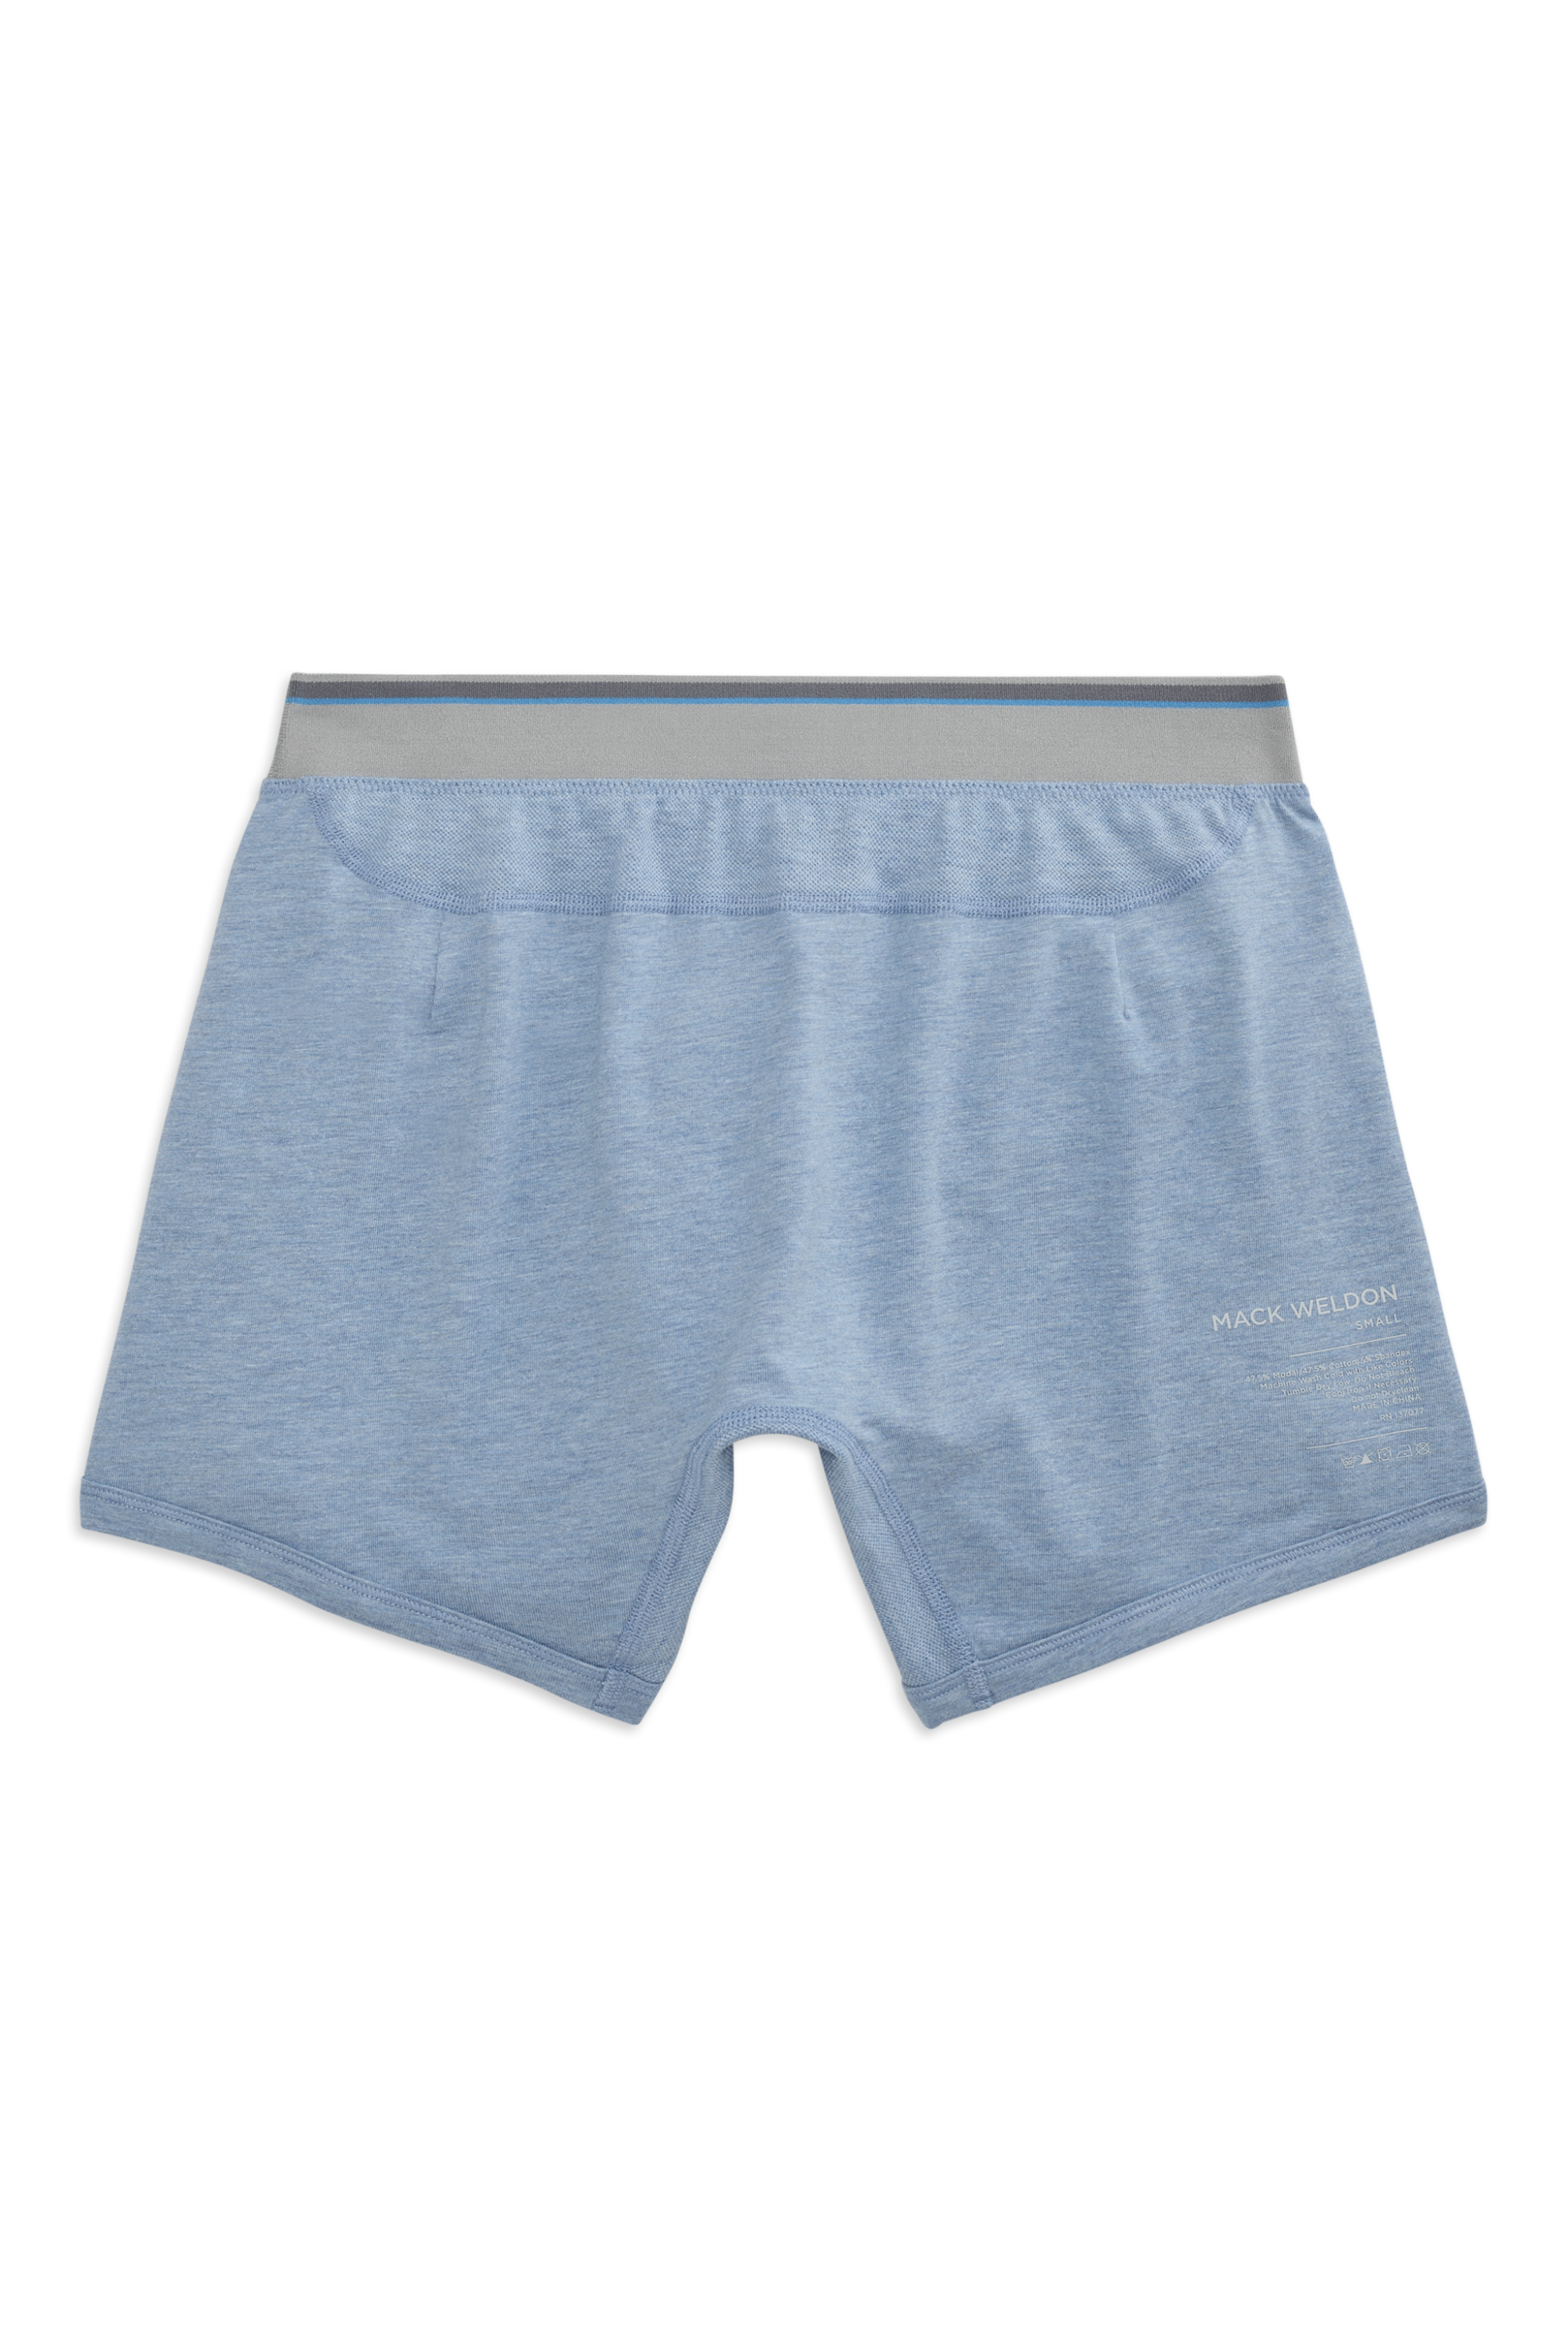 No Wash Underwear: Boxer Shorts Are Yellow in Front, Brown in the Back